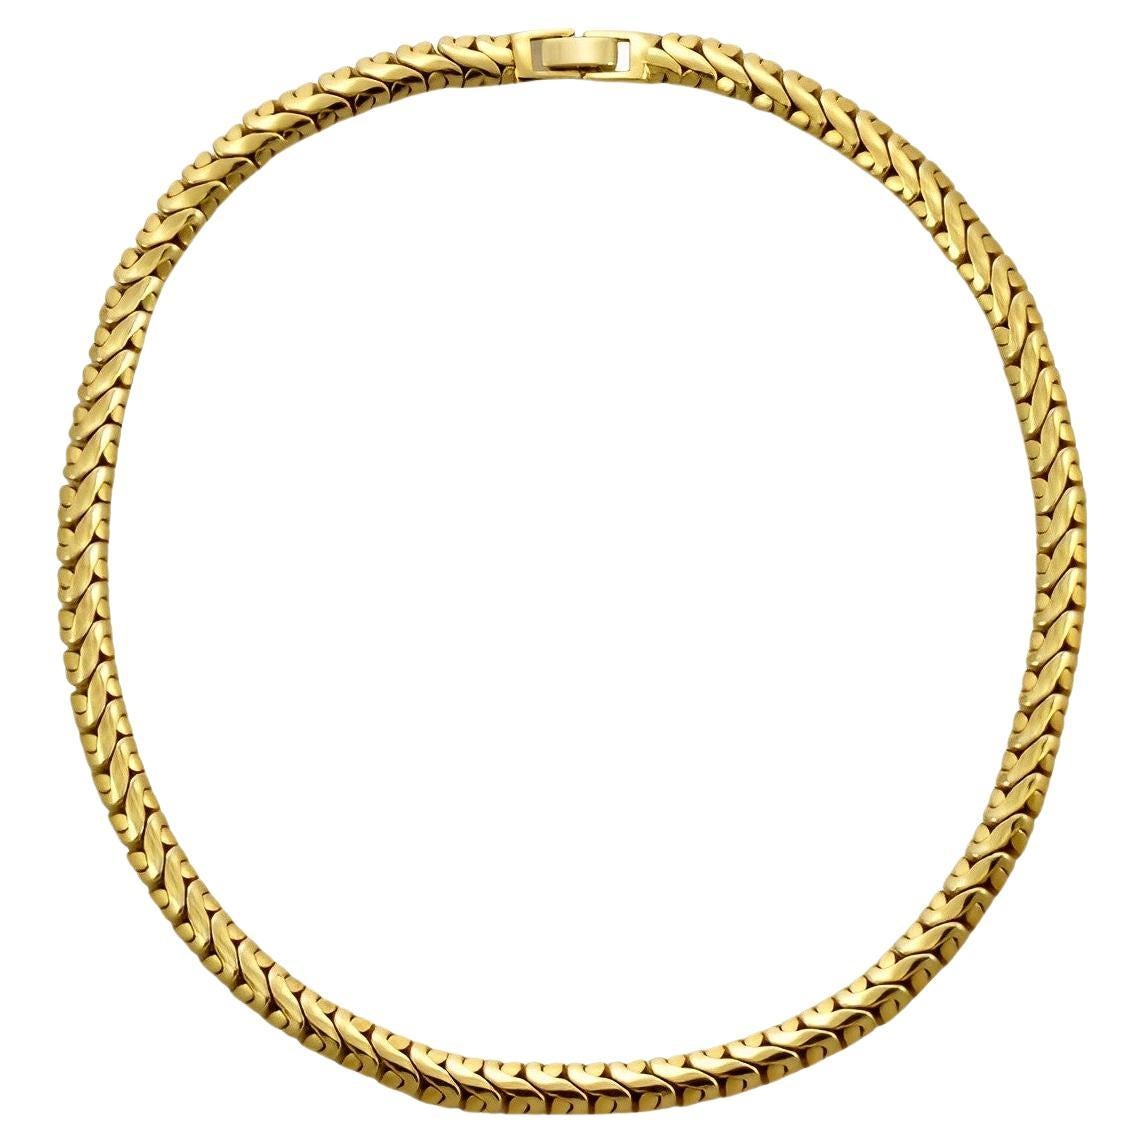 Gold Plated Heavy Fancy Link Chain Necklace